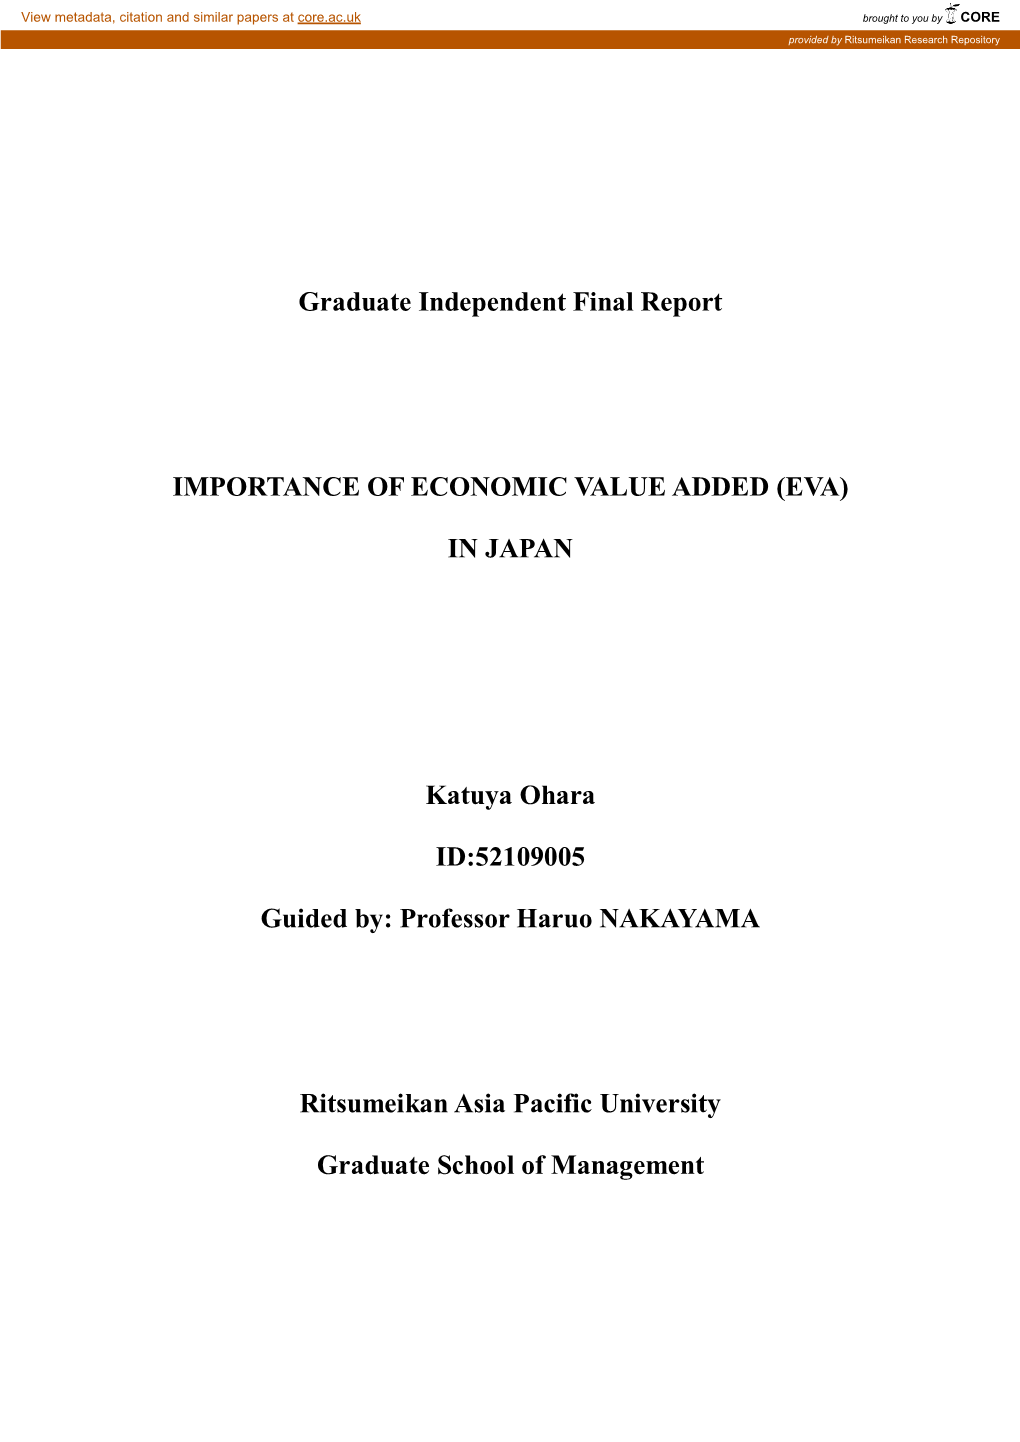 Graduate Independent Final Report IMPORTANCE OF